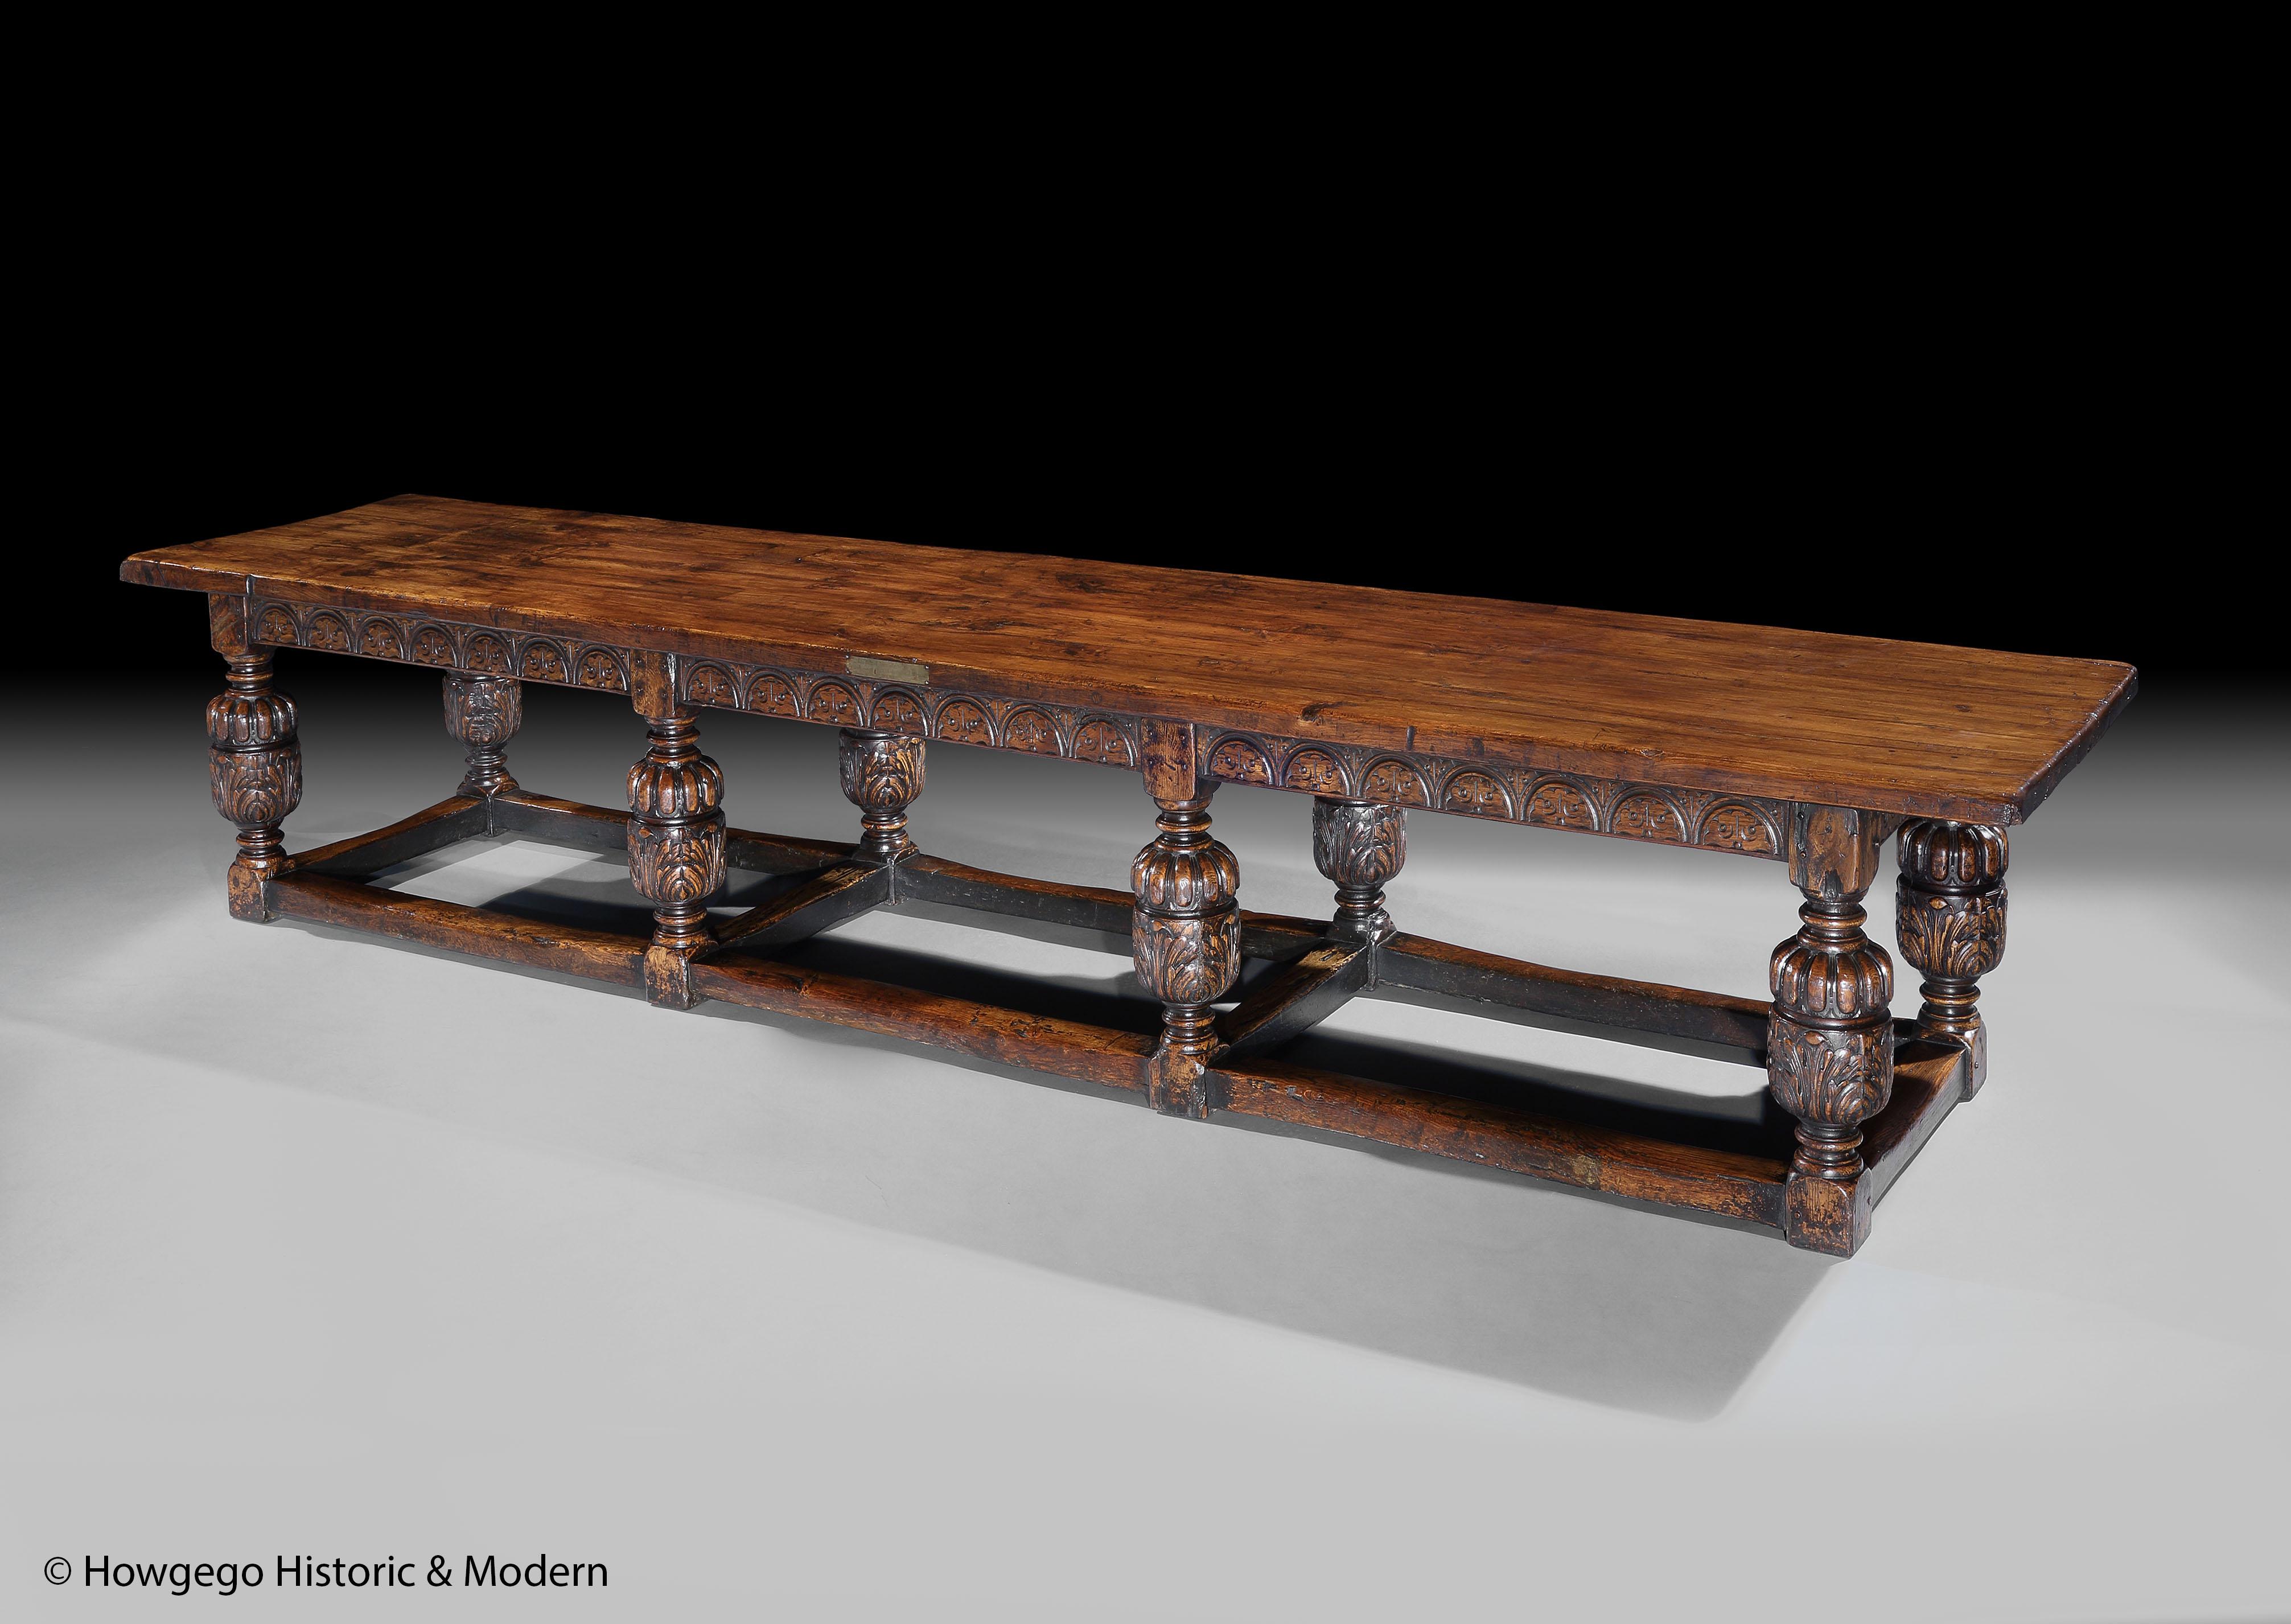 A massive, 18-20 seater, eight-bulbous legged, antiquarian, elizabethan revival, oak, refectory table, measures: 4.3m/169.30”/14ft long, 89cm/35” wide.

Bearing a brass label inscribed 'the gift of lord waring to The British Federation Of